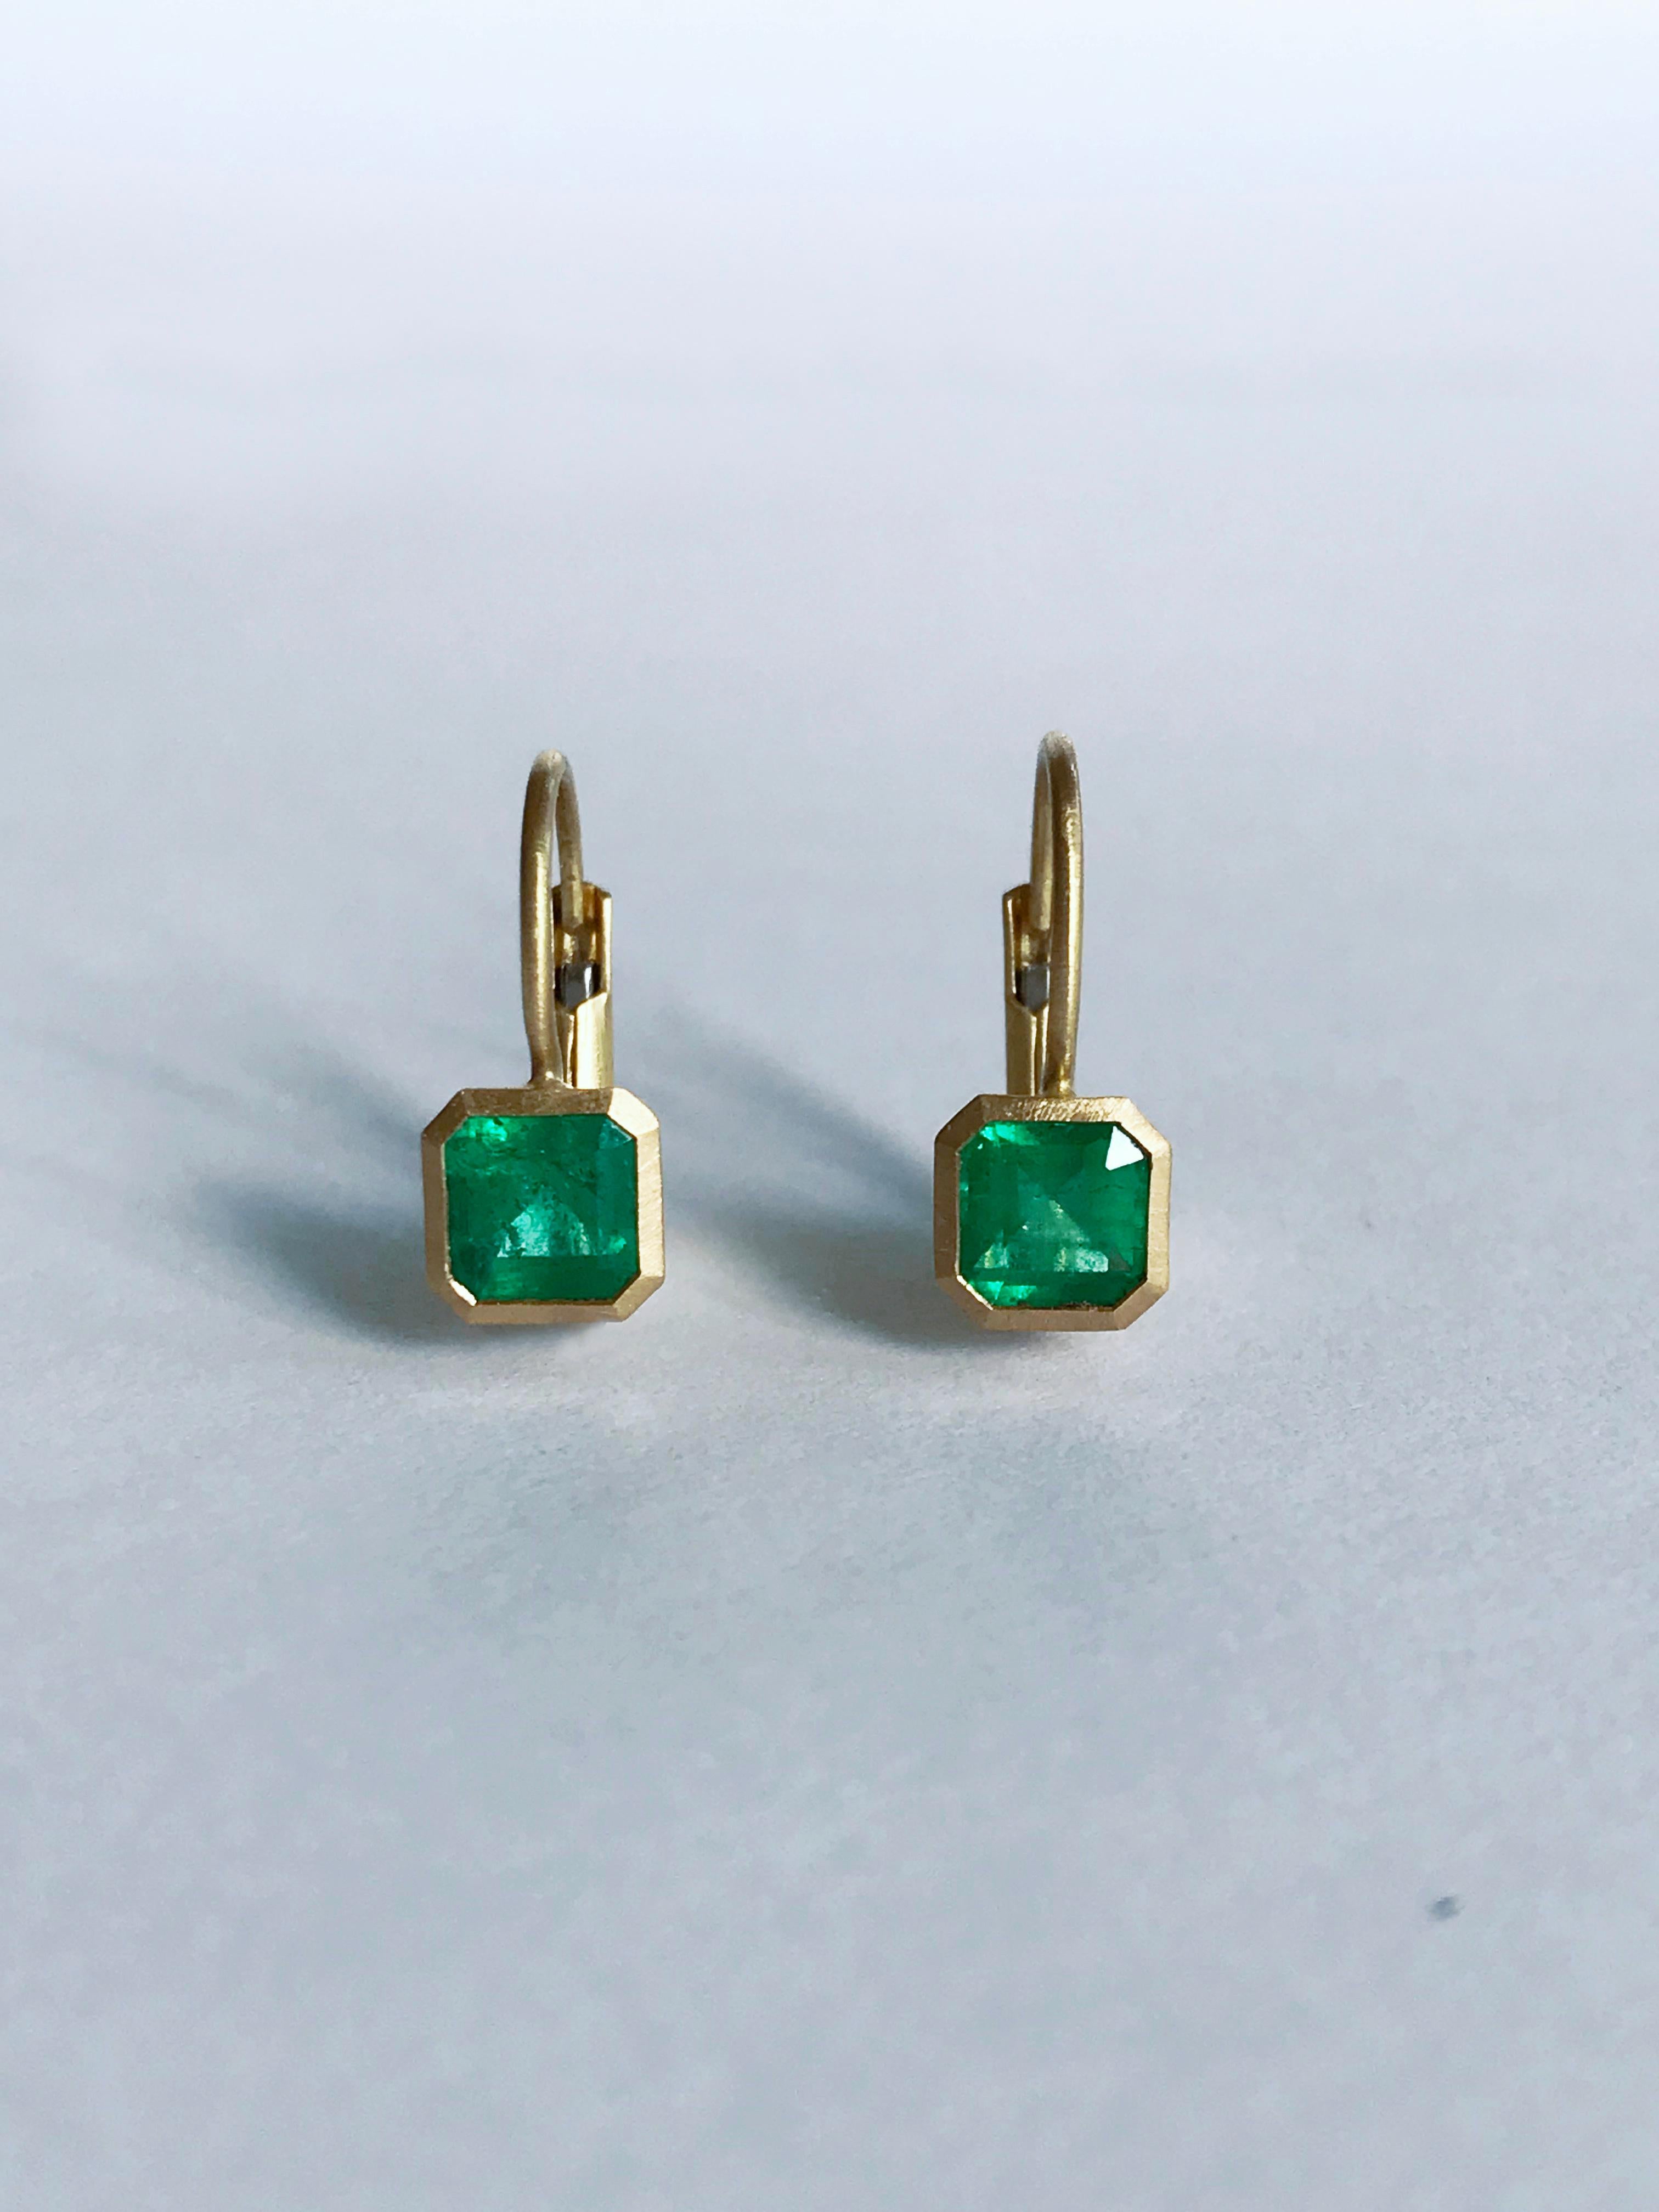 Dalben 0.91 Carat Colombian Emerald Yellow Gold Tiny Earrings For Sale 4